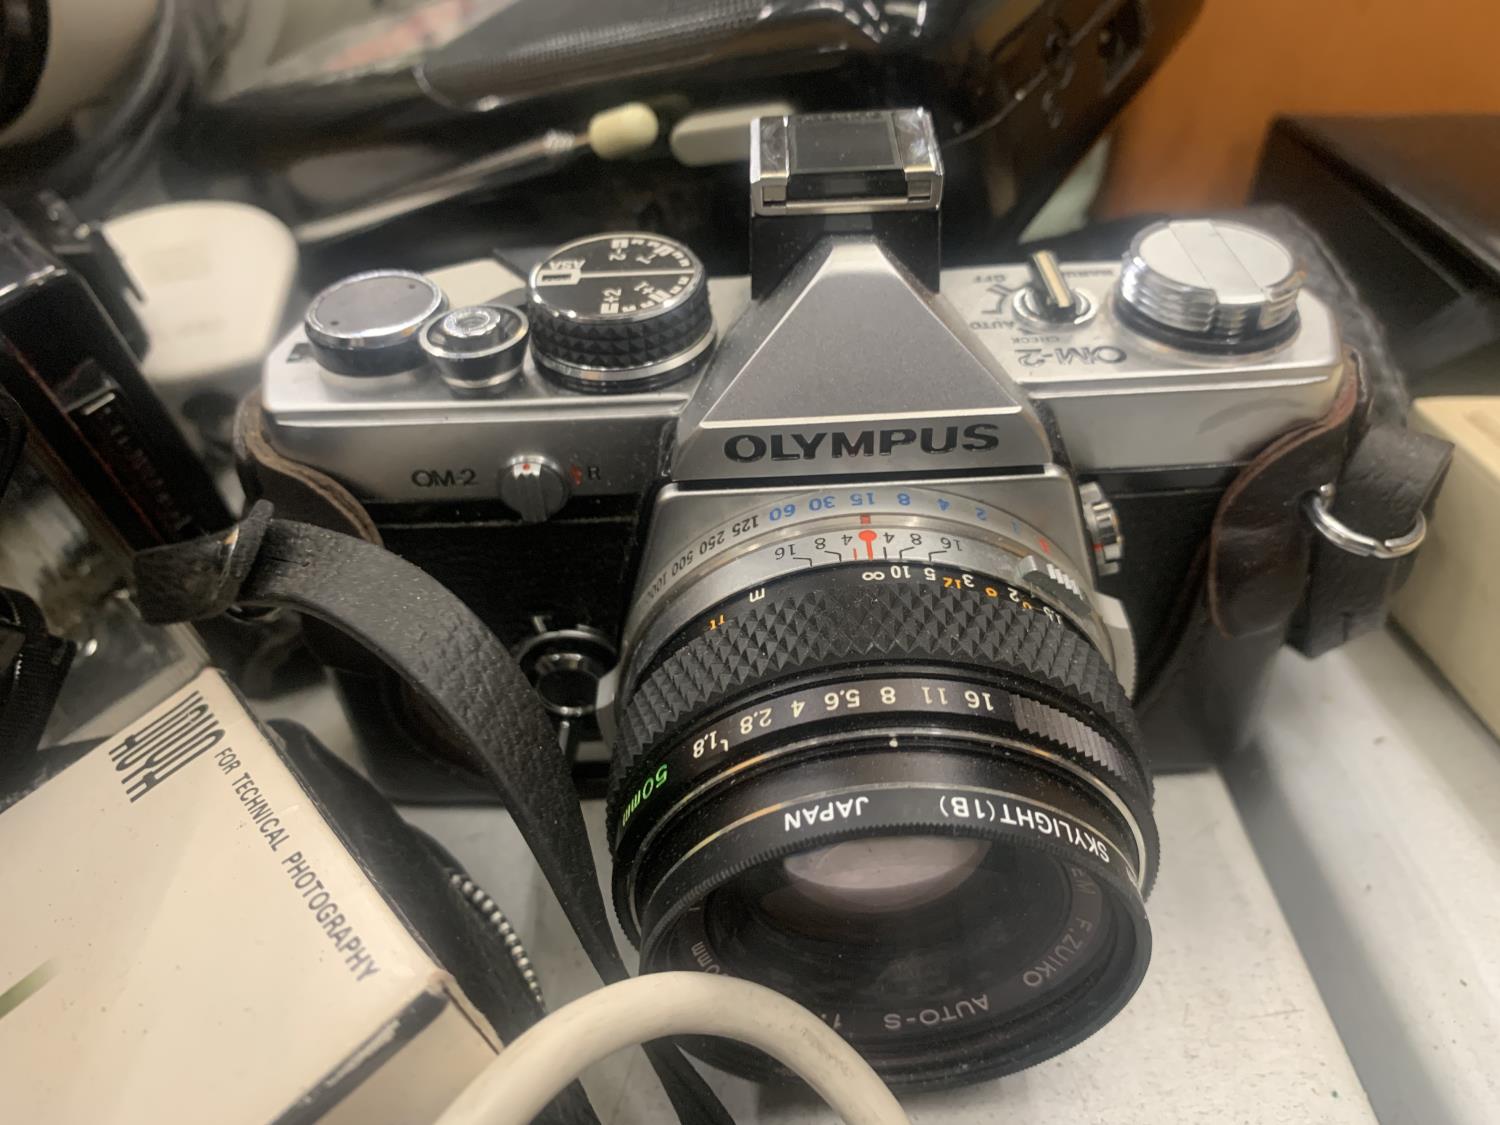 A QUANTITY OF VINTAGE CAMERAS TO INCLUDE AN OLYMPUS OM-2 AND OLYMPUS ELECTRONIC FLASH A11, - Image 3 of 5